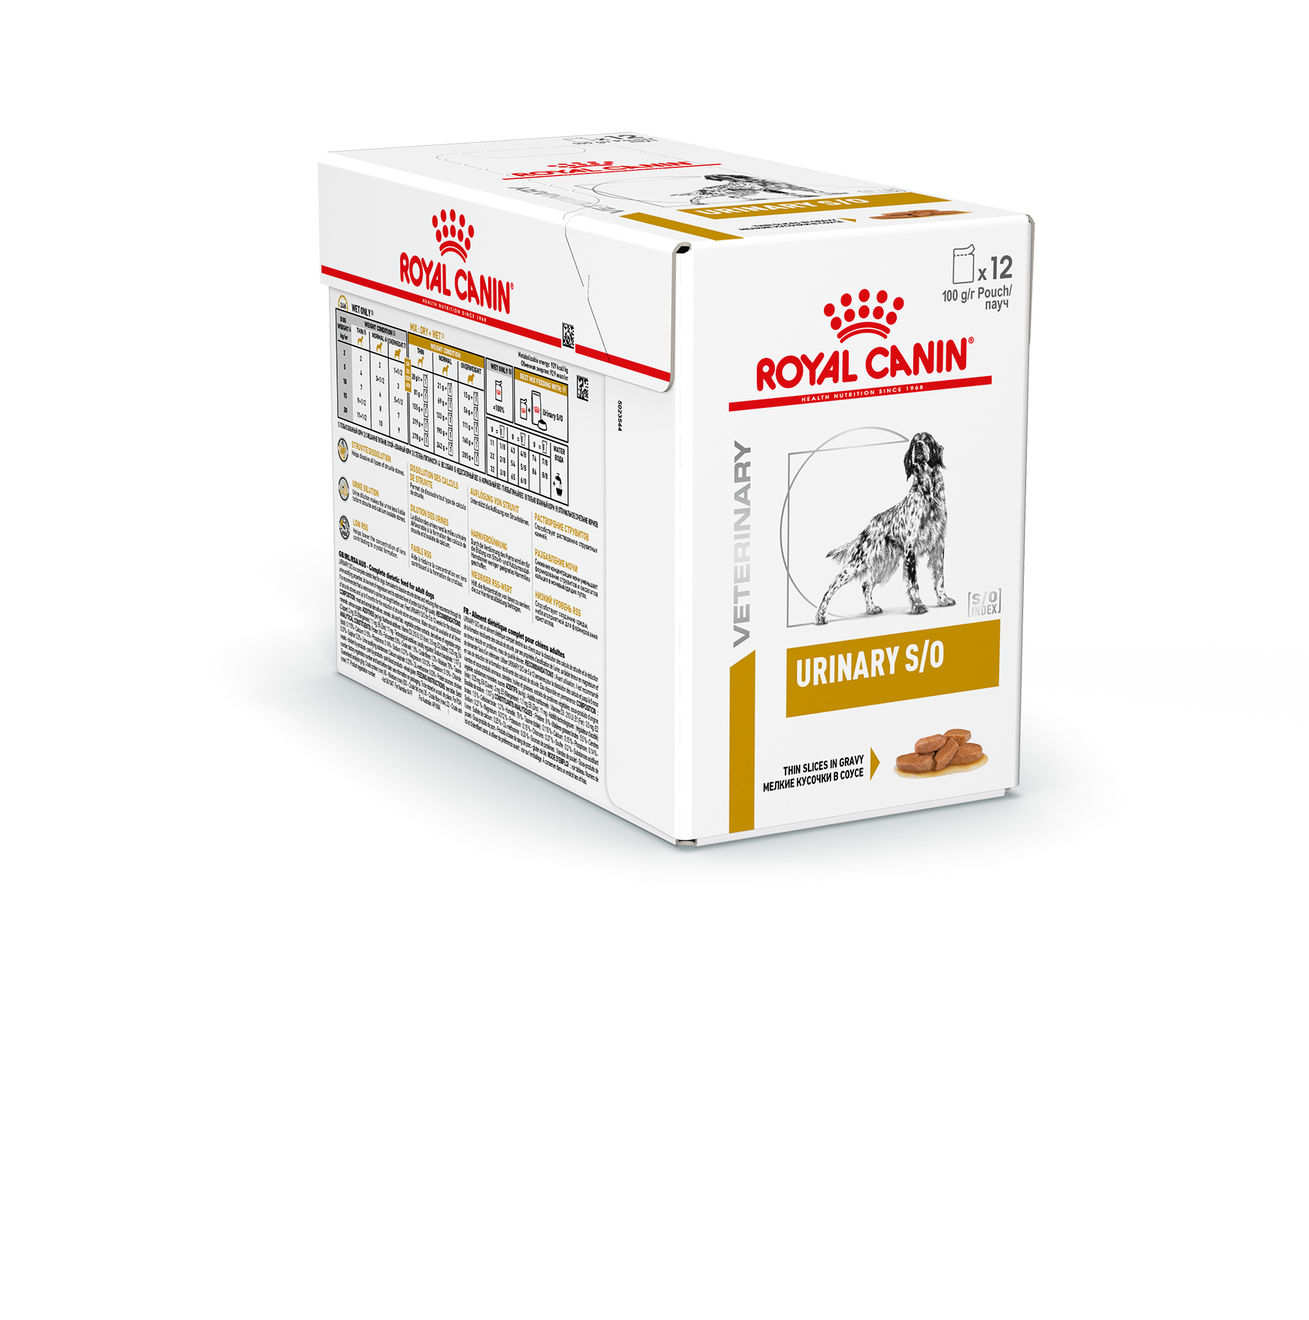 VHN Dog Wet Urinary S/O 100gr Pouch (12uds)  Adulto Perro Royal Canin